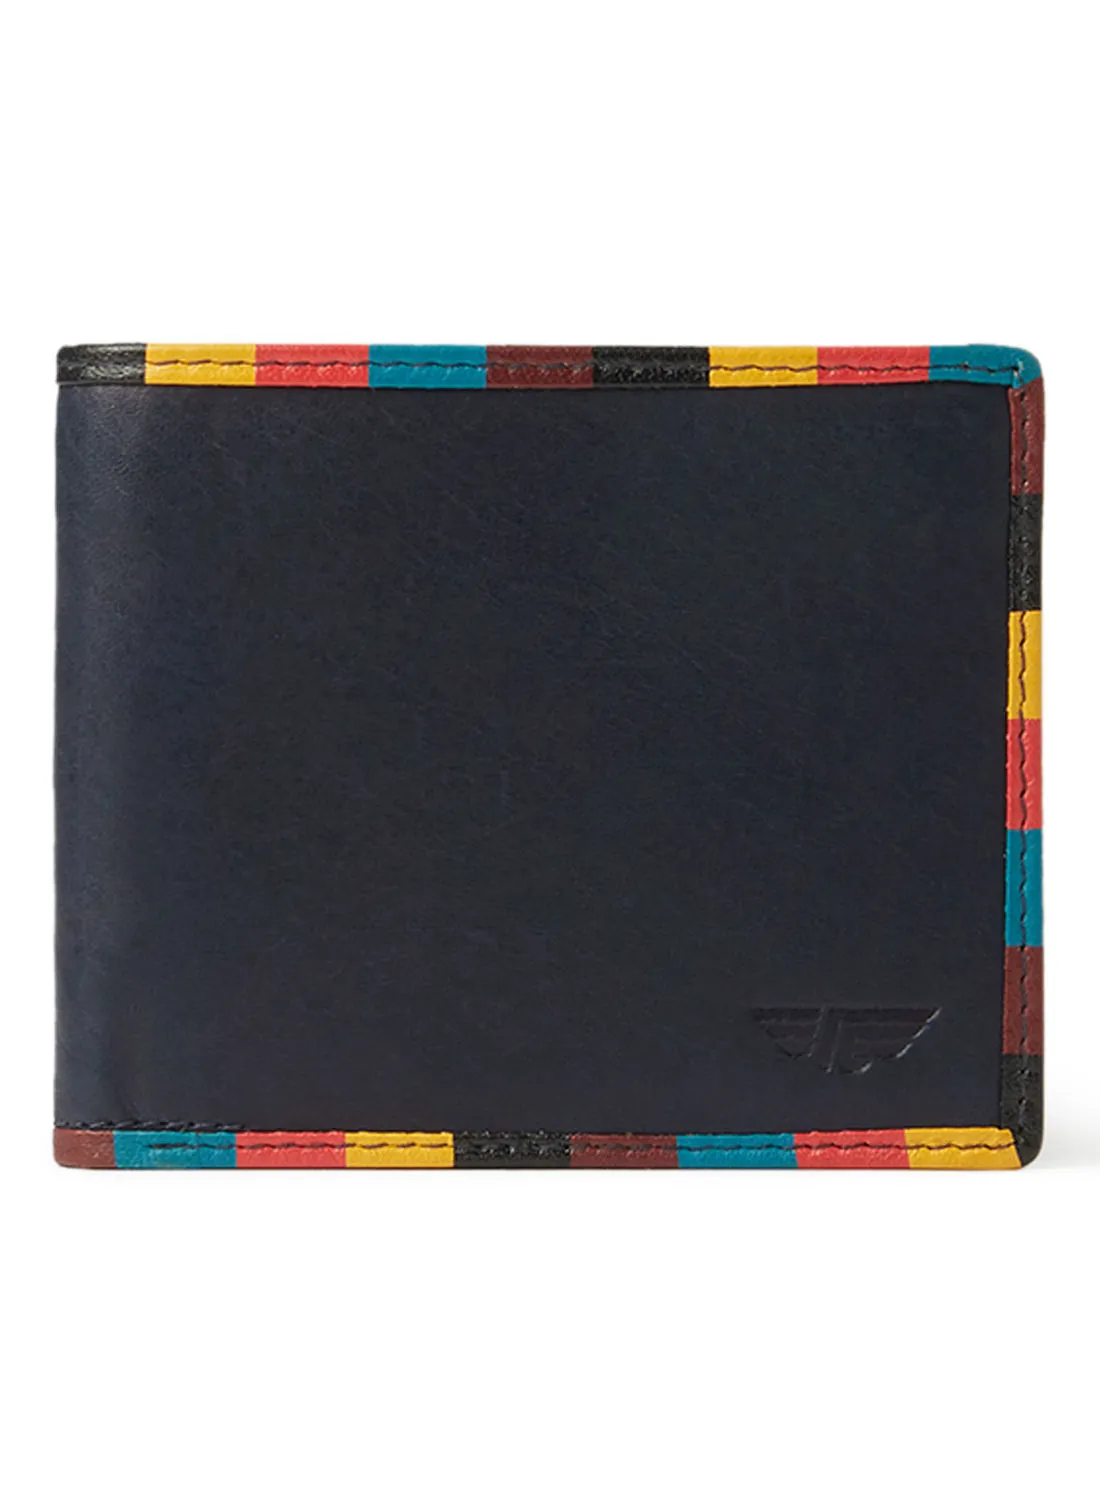 Red Tape Colour Block Border Leather Wallet Navy Blue